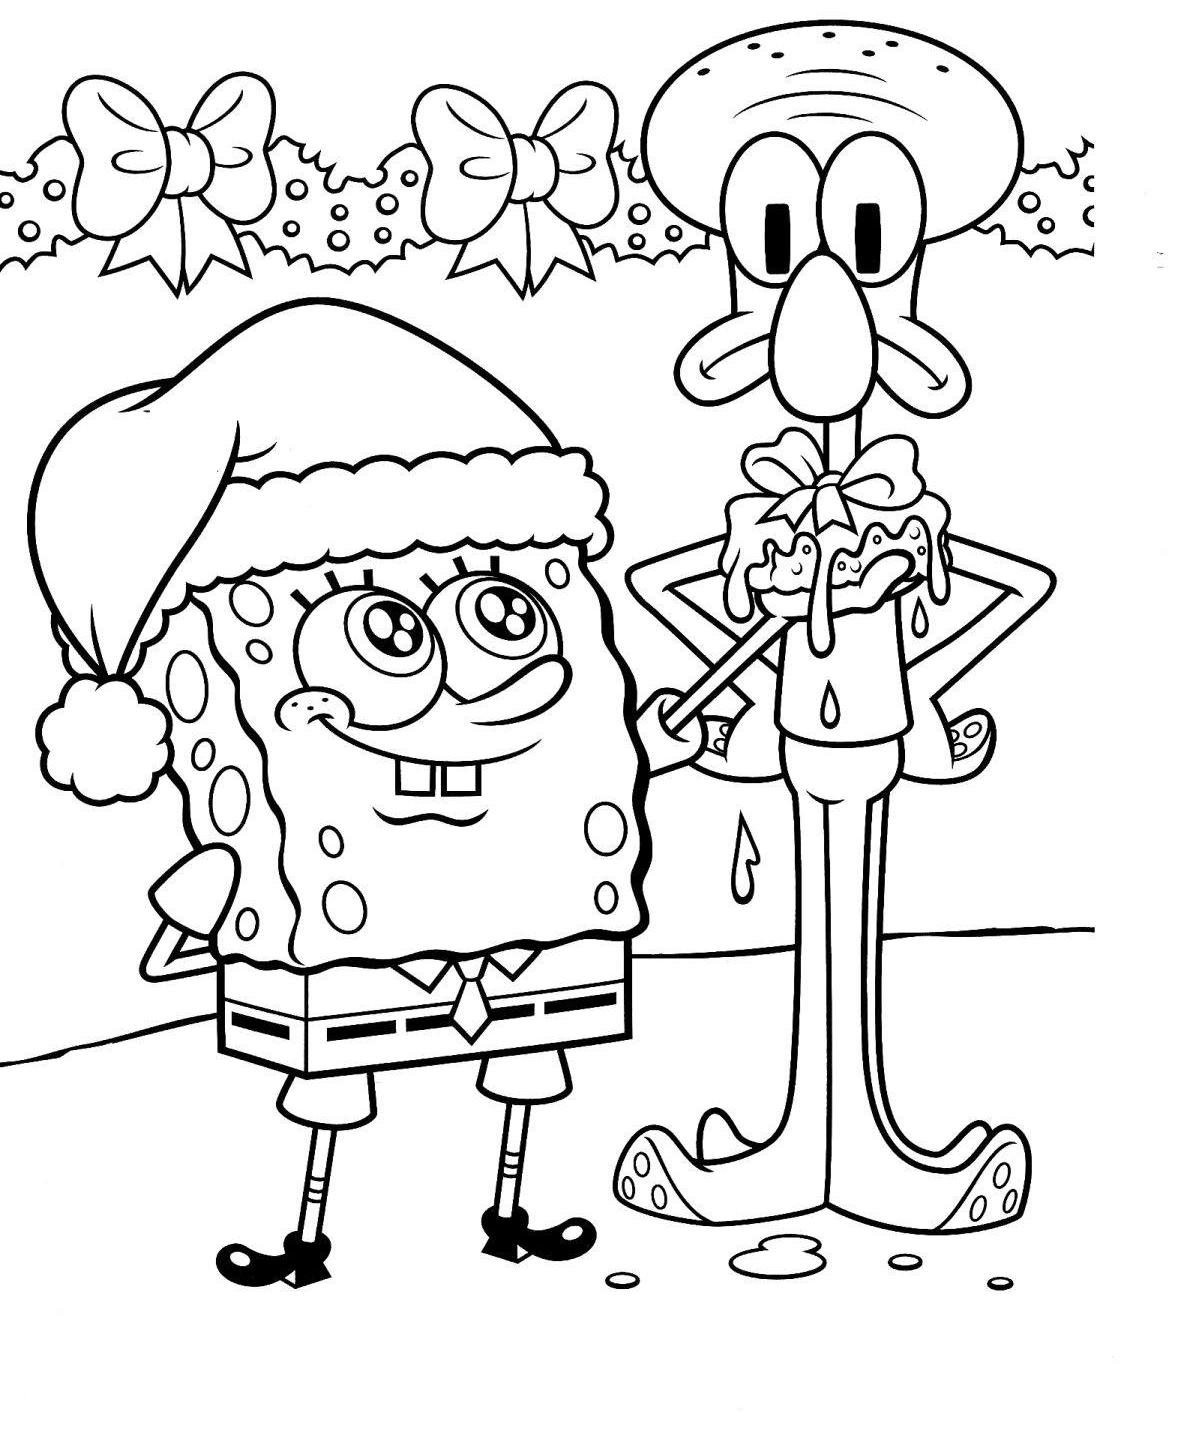 Kids Christmas Coloring Pages Printable
 Christmas Drawing For Children at GetDrawings